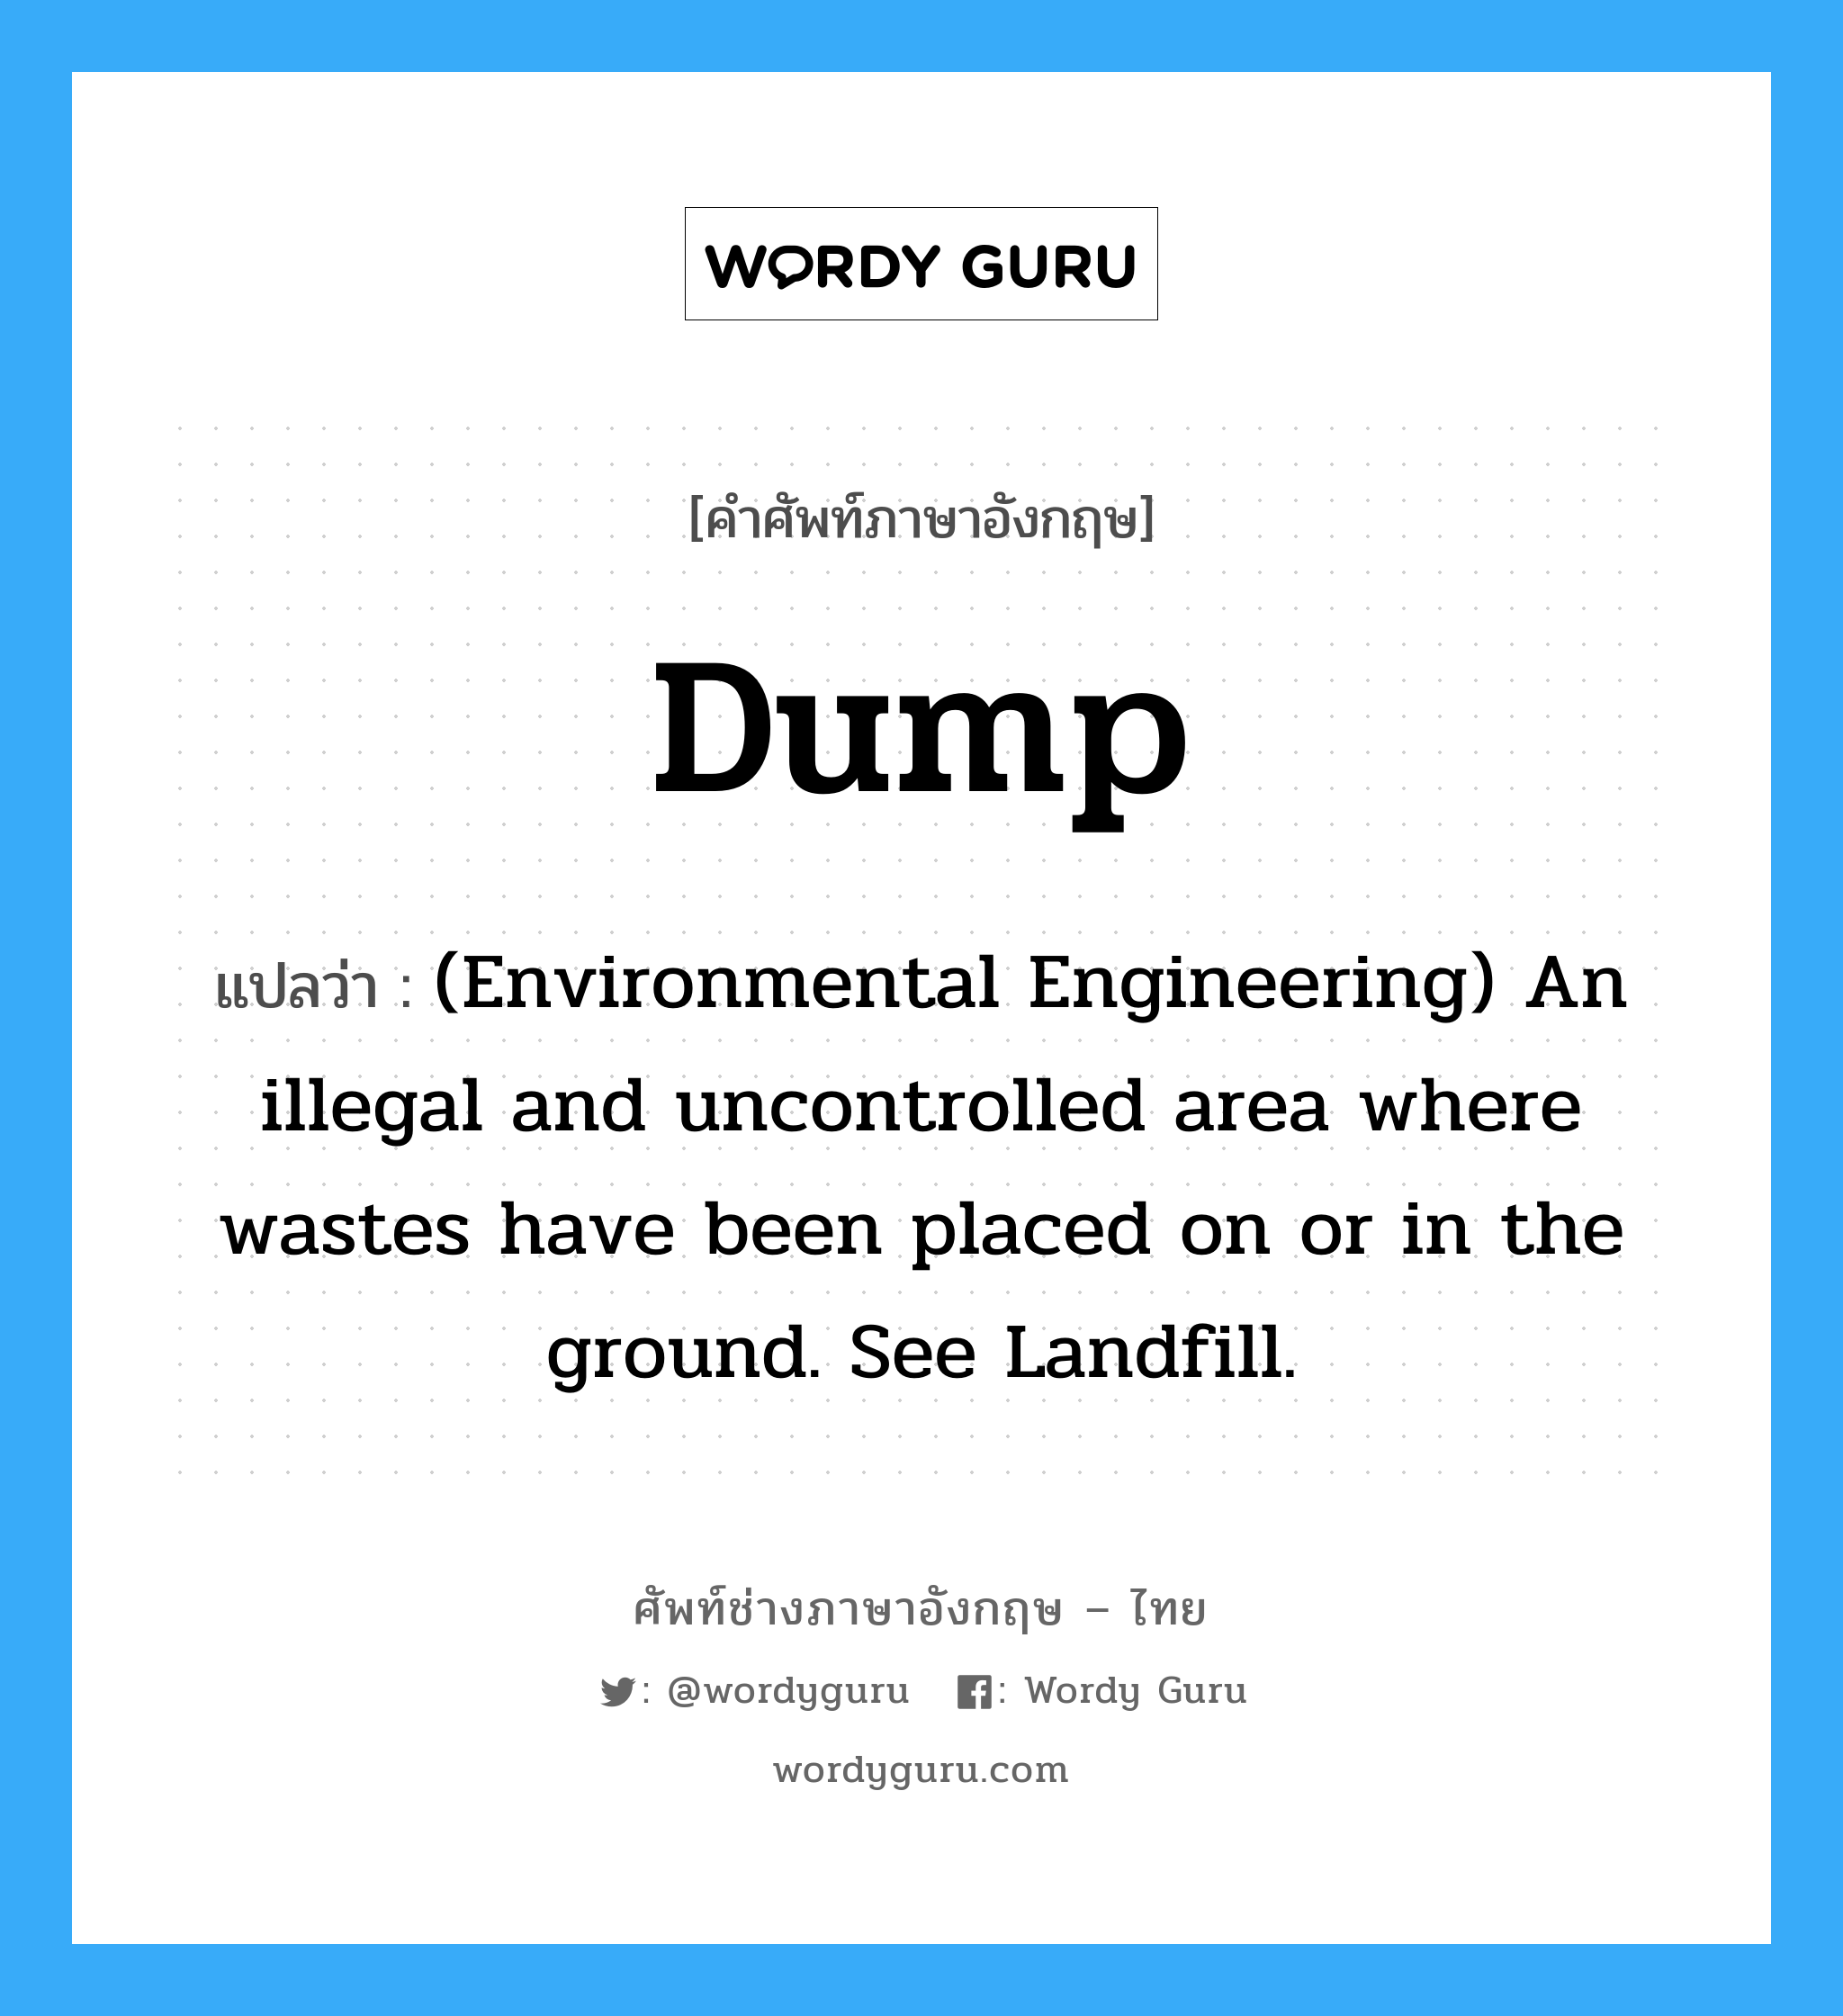 (Environmental Engineering) An illegal and uncontrolled area where wastes have been placed on or in the ground. See Landfill. ภาษาอังกฤษ?, คำศัพท์ช่างภาษาอังกฤษ - ไทย (Environmental Engineering) An illegal and uncontrolled area where wastes have been placed on or in the ground. See Landfill. คำศัพท์ภาษาอังกฤษ (Environmental Engineering) An illegal and uncontrolled area where wastes have been placed on or in the ground. See Landfill. แปลว่า Dump